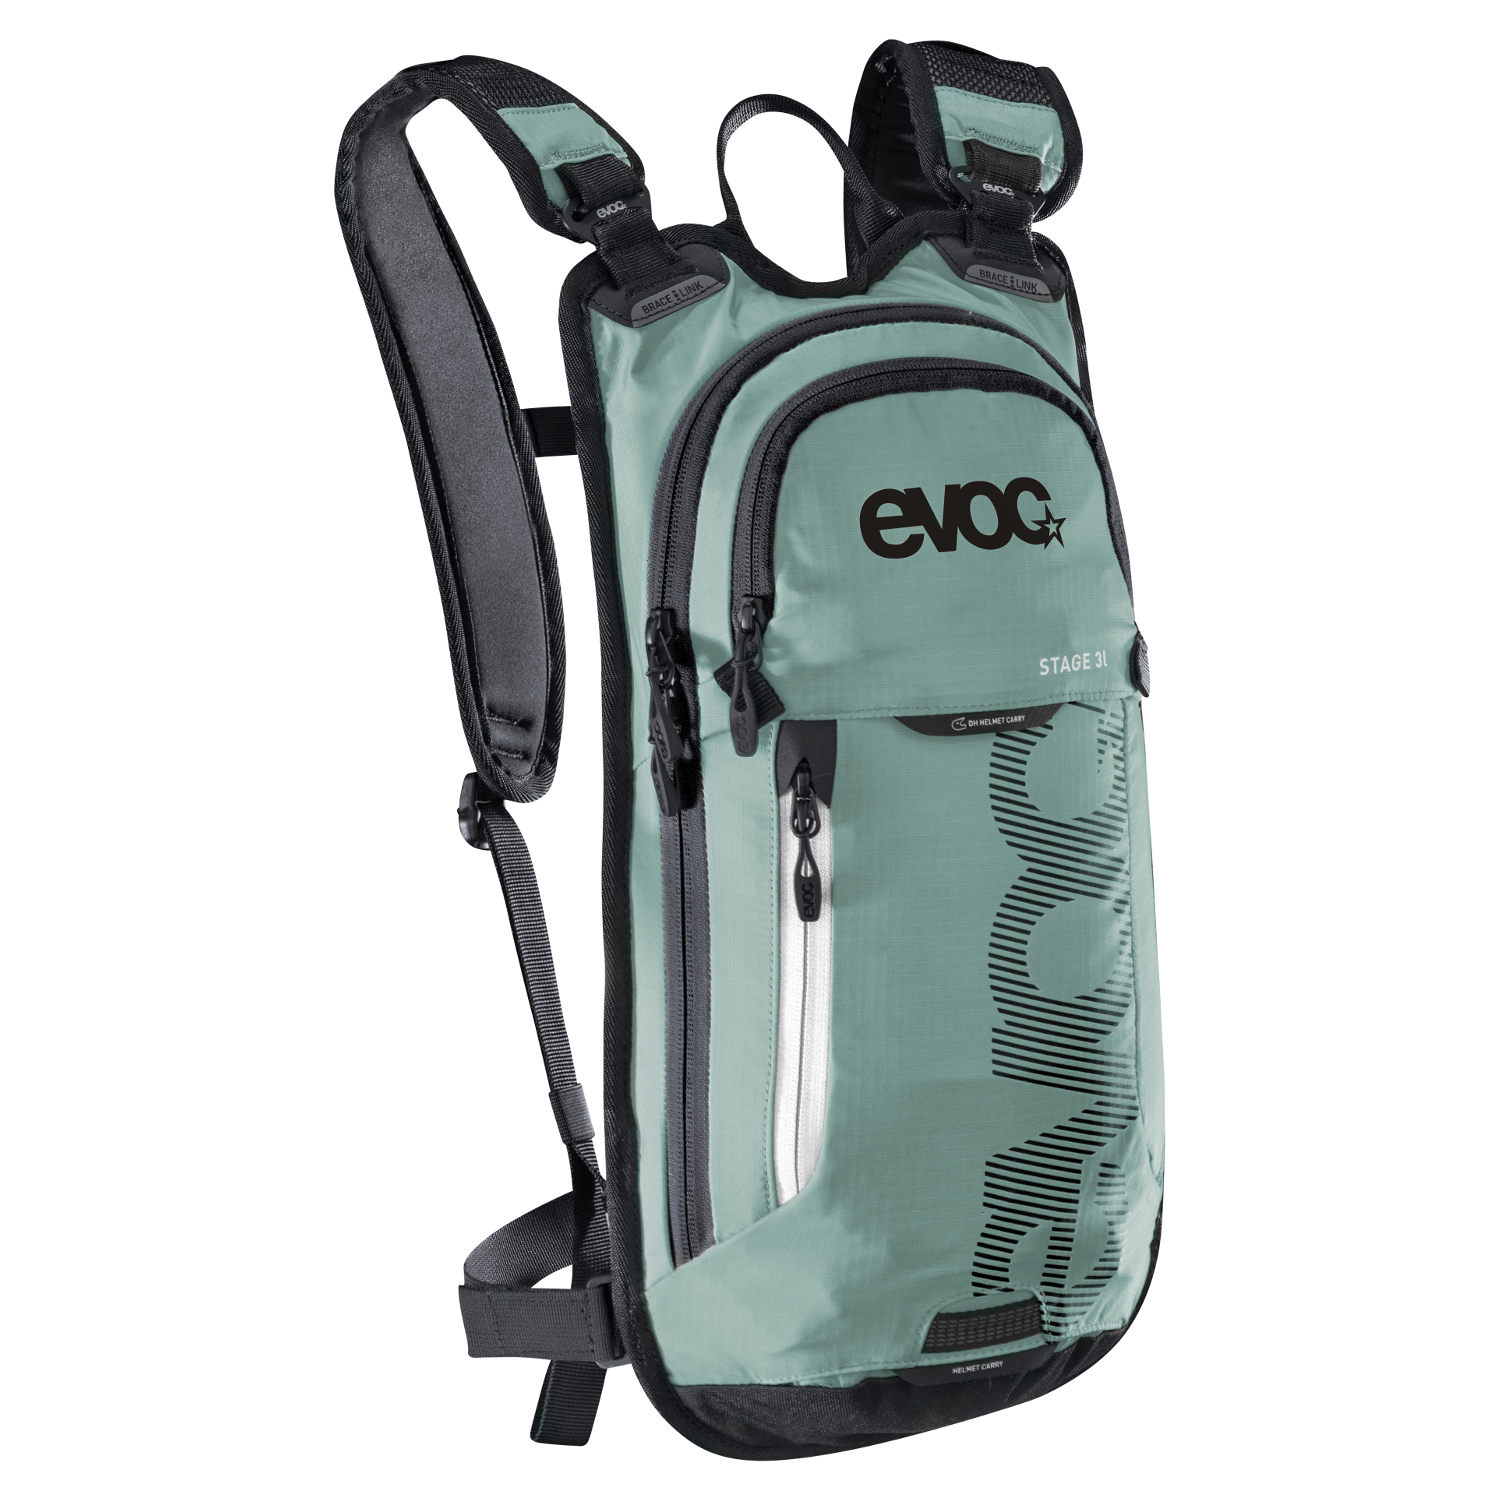 Evoc Backpack with Hydration System Compartment Stage Light Petrol, 3 Liter